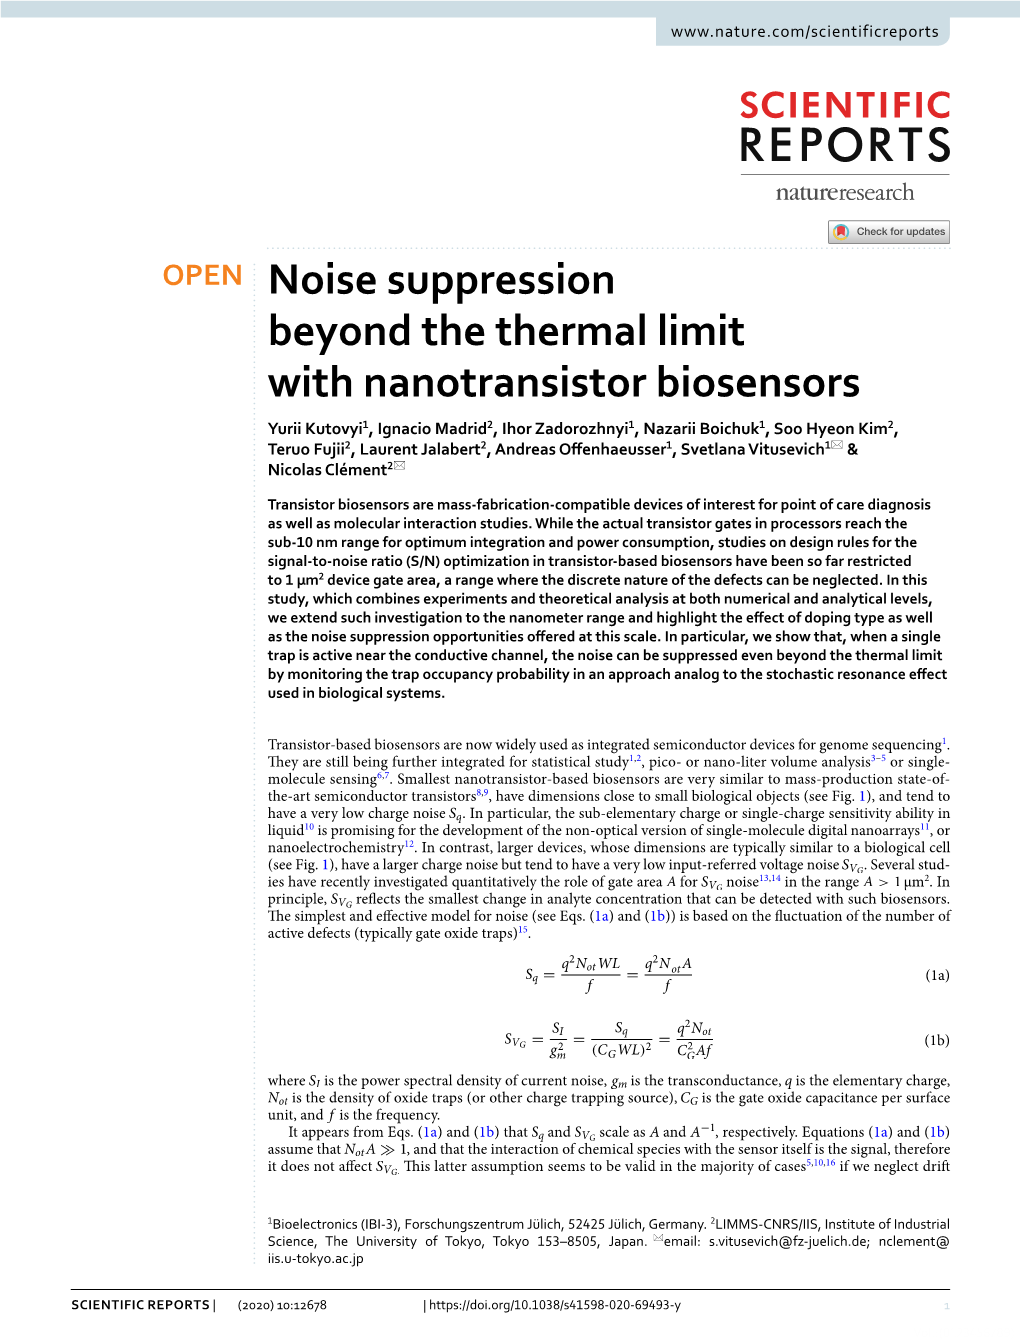 Noise Suppression Beyond the Thermal Limit with Nanotransistor